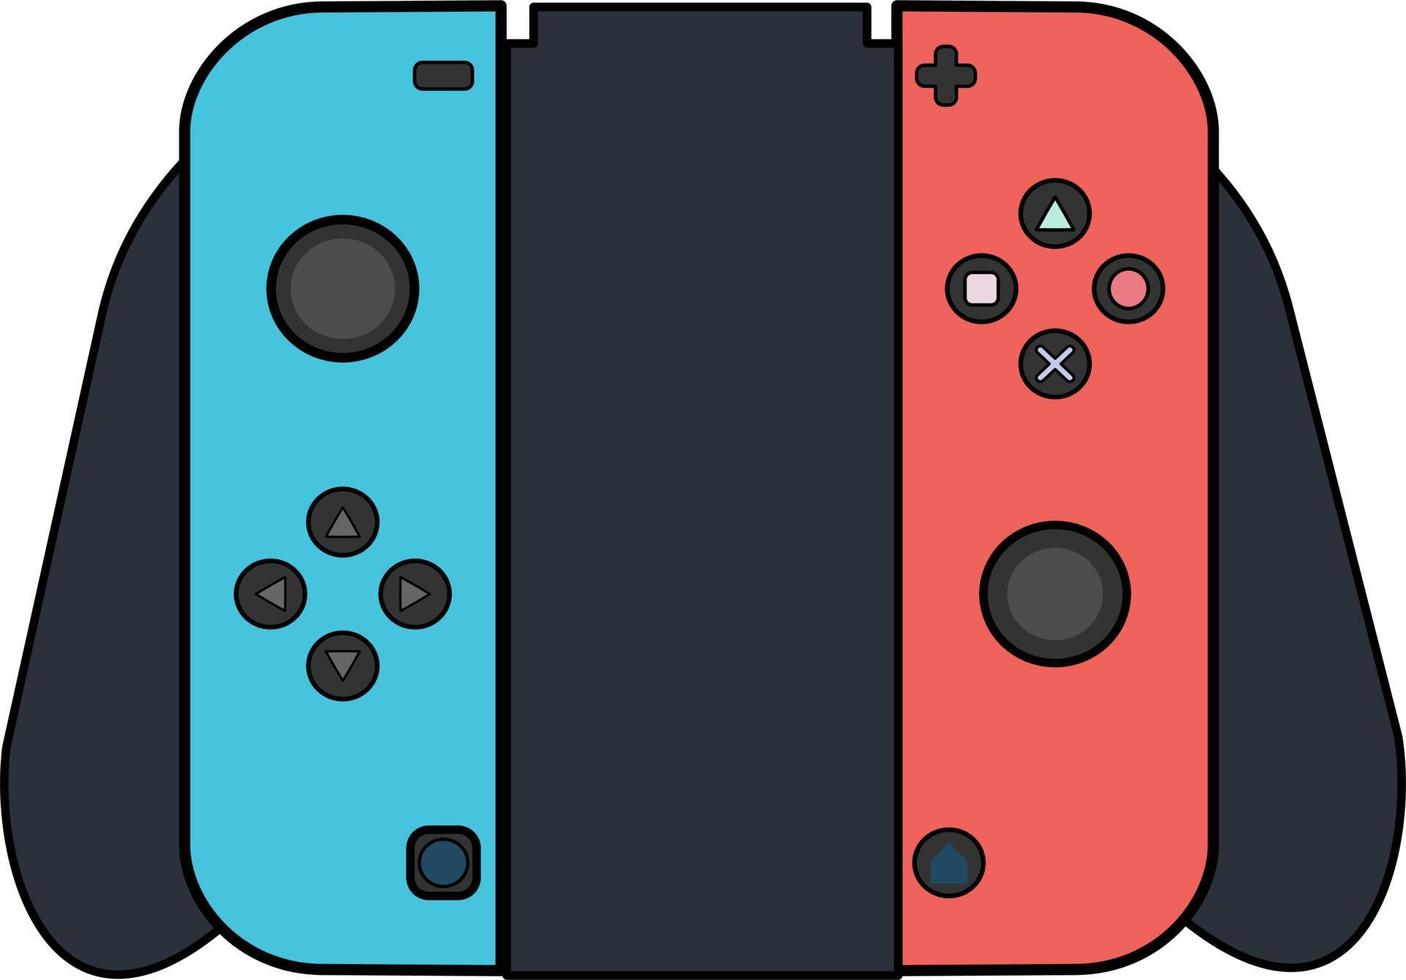 console game device. game controller vector